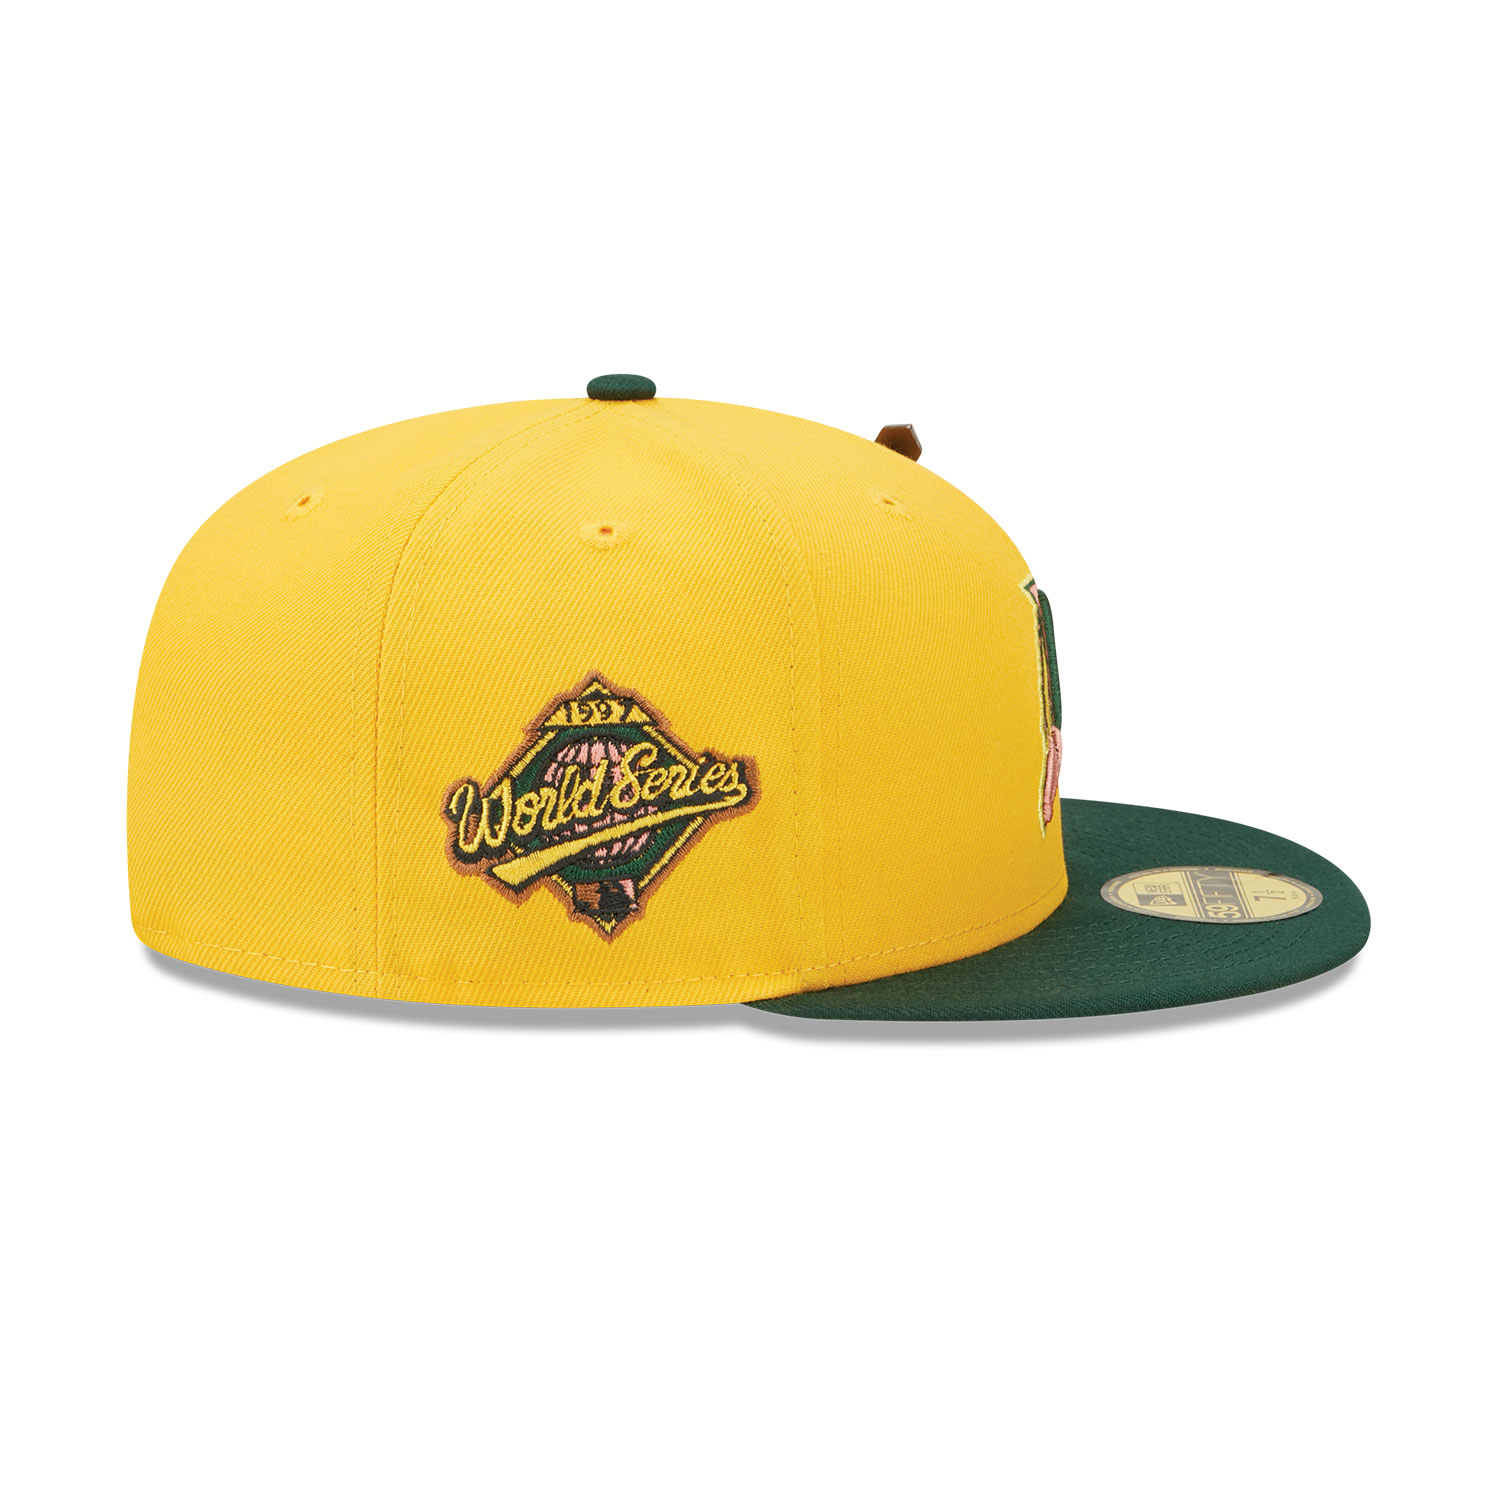 Florida Marlins Back to School Yellow 59FIFTY Fitted Cap